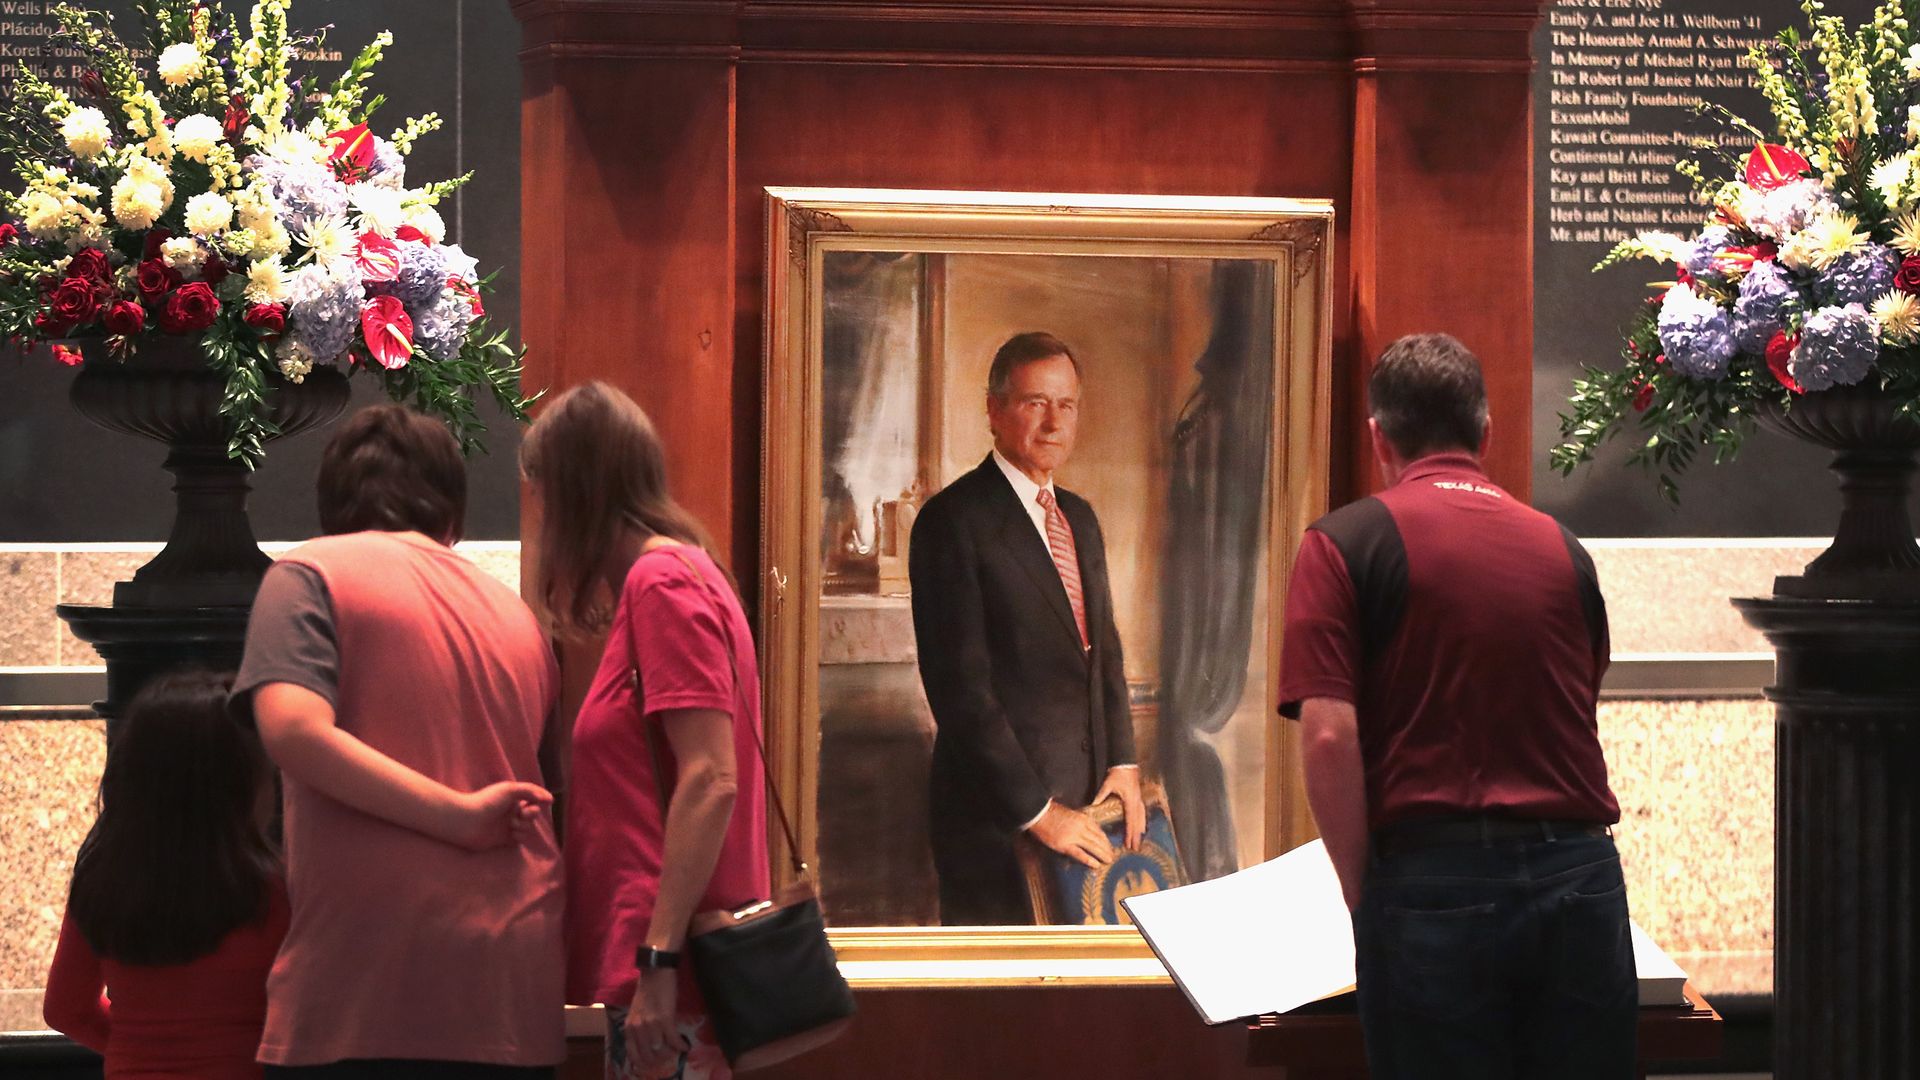 Visitors sign a guest book at the George H.W. Bush Presidential Library Center in College Station, Texas. 